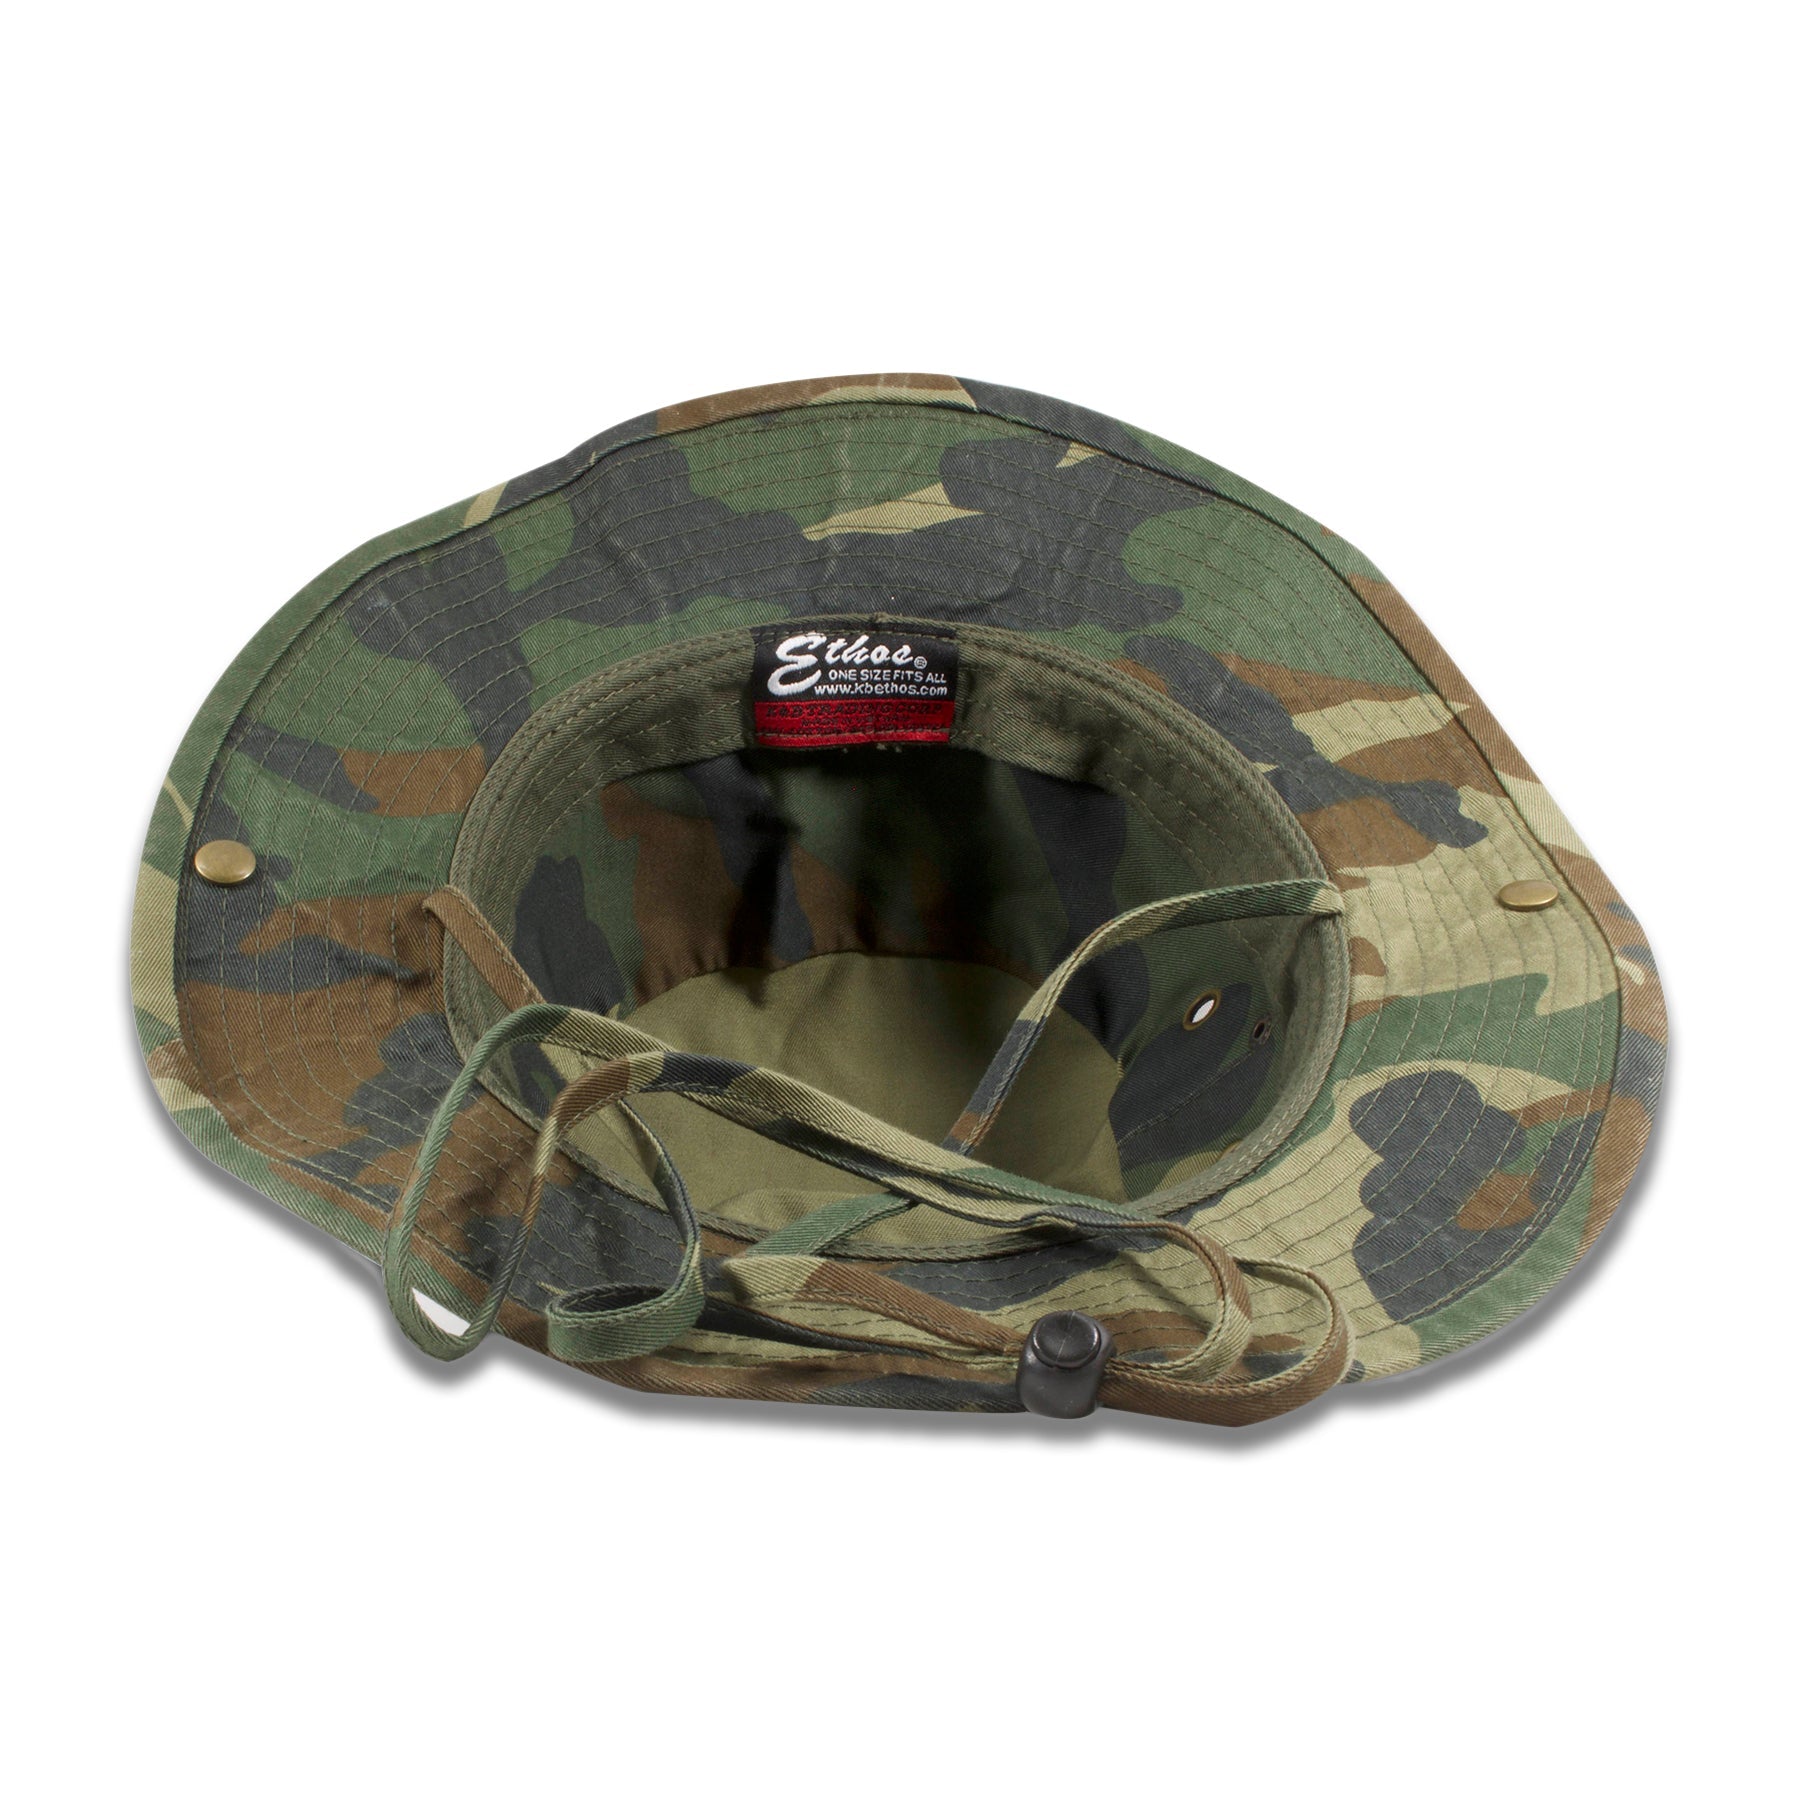 The under brim of the camouflage boonie bucket hat has a camouflage pattern